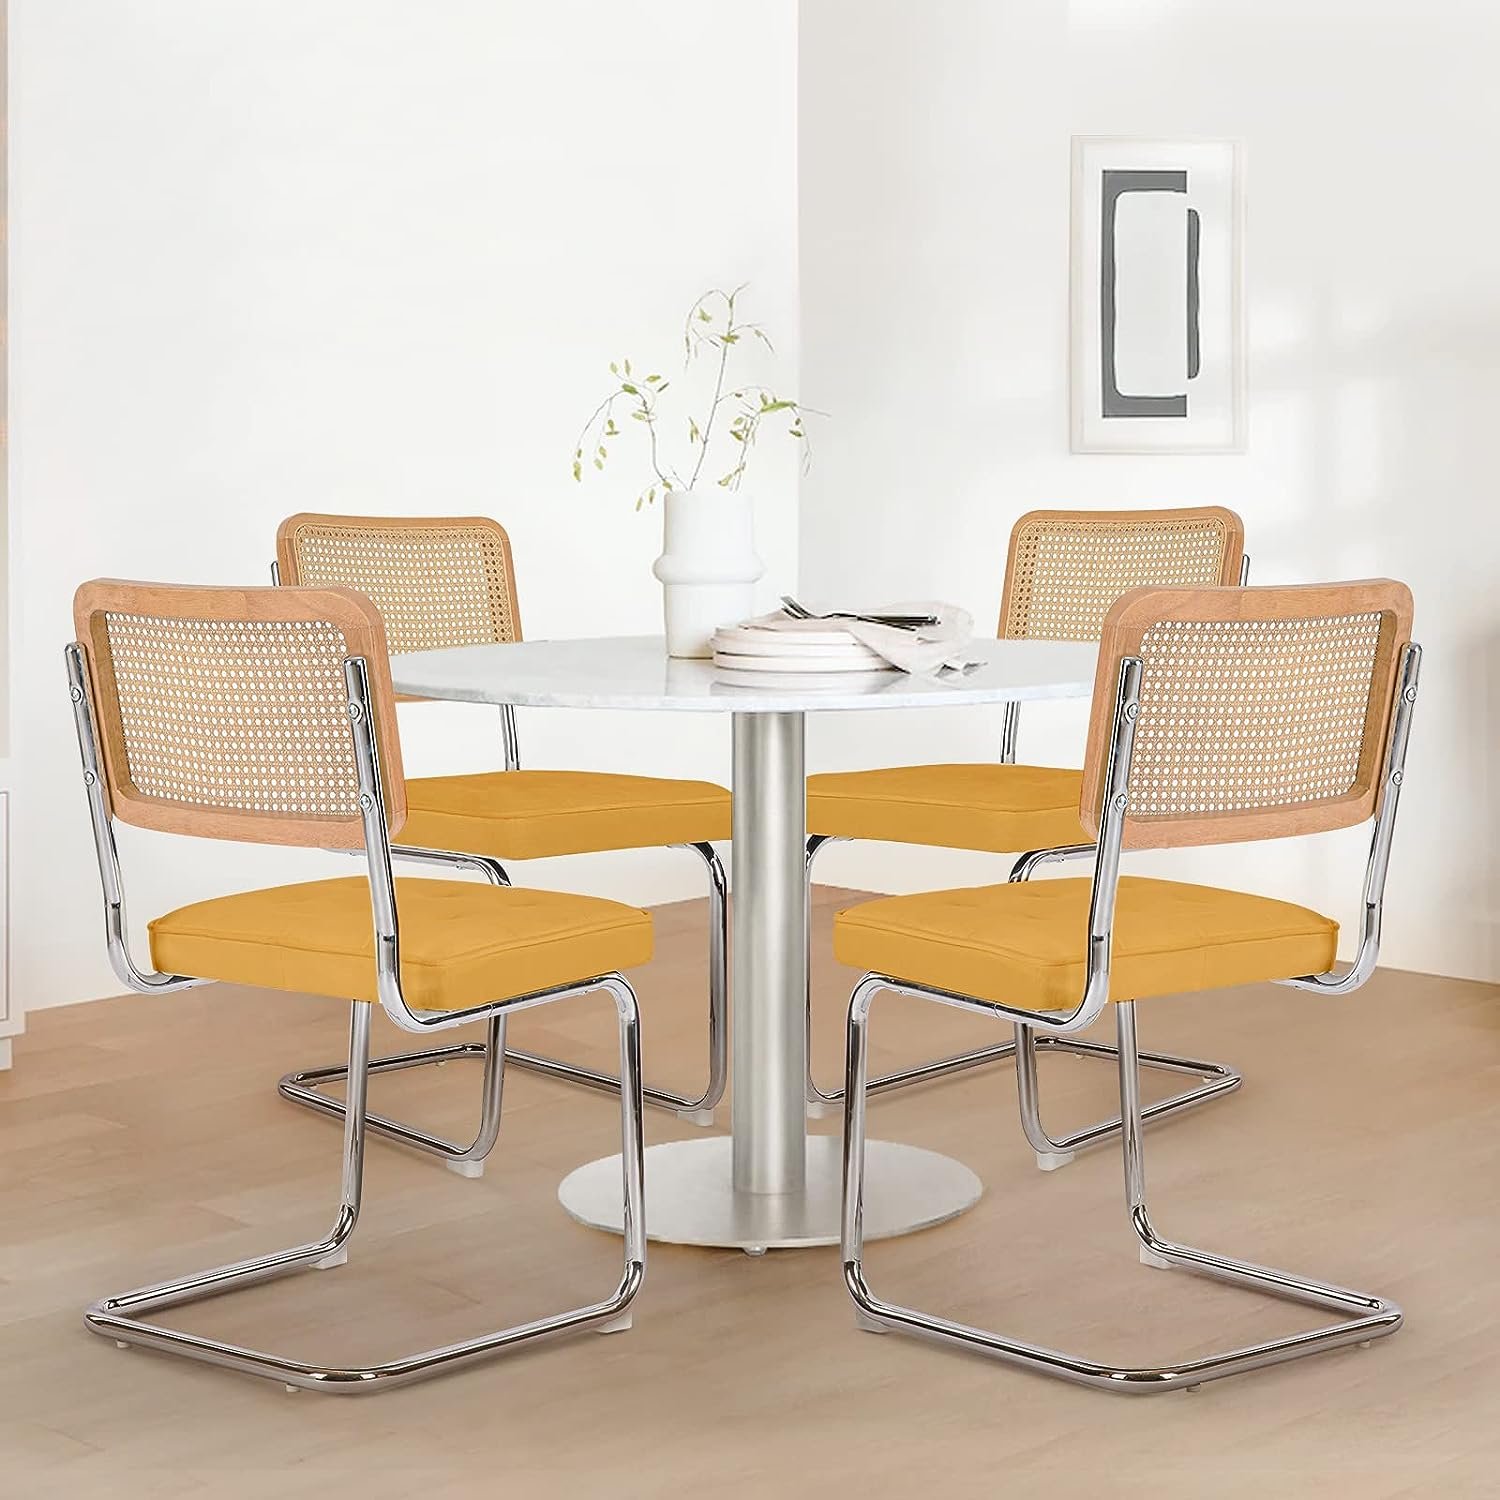 COLAMY Mid Century Modern Dining Chairs Set of 4 (Copy) (Copy) (Copy) (Copy)